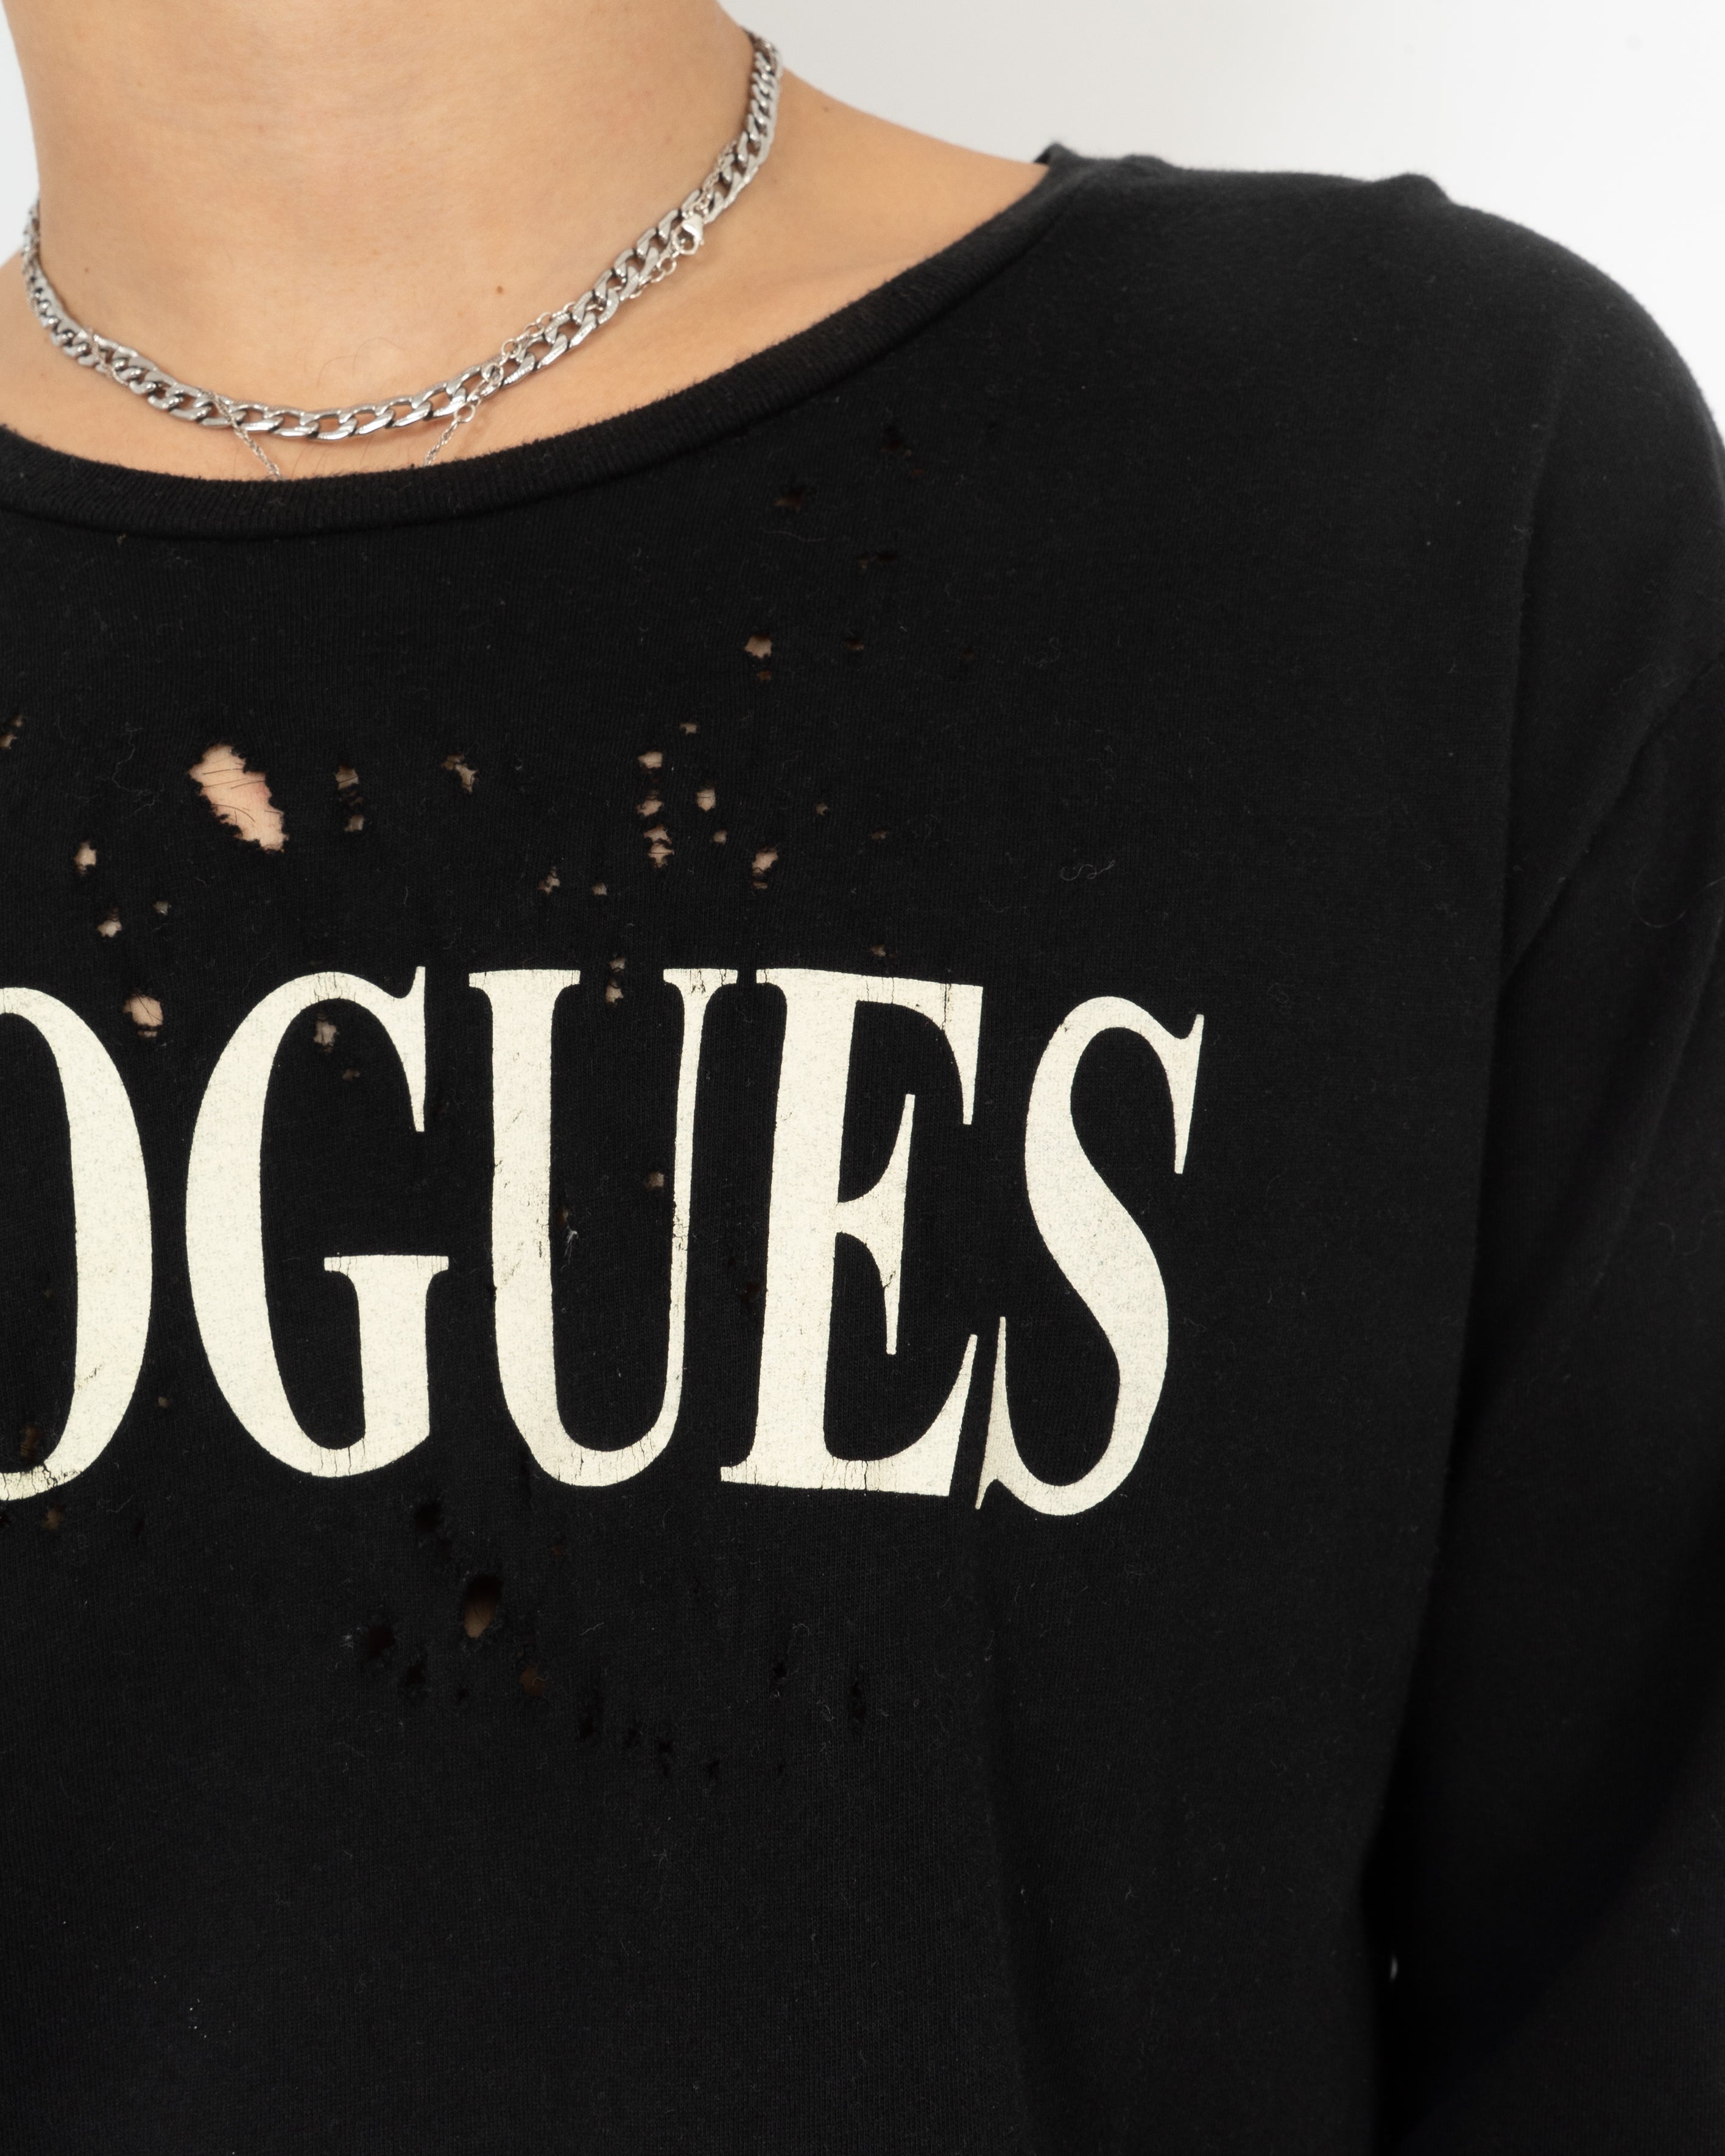 SS16 Distressed Drogues Longsleeve